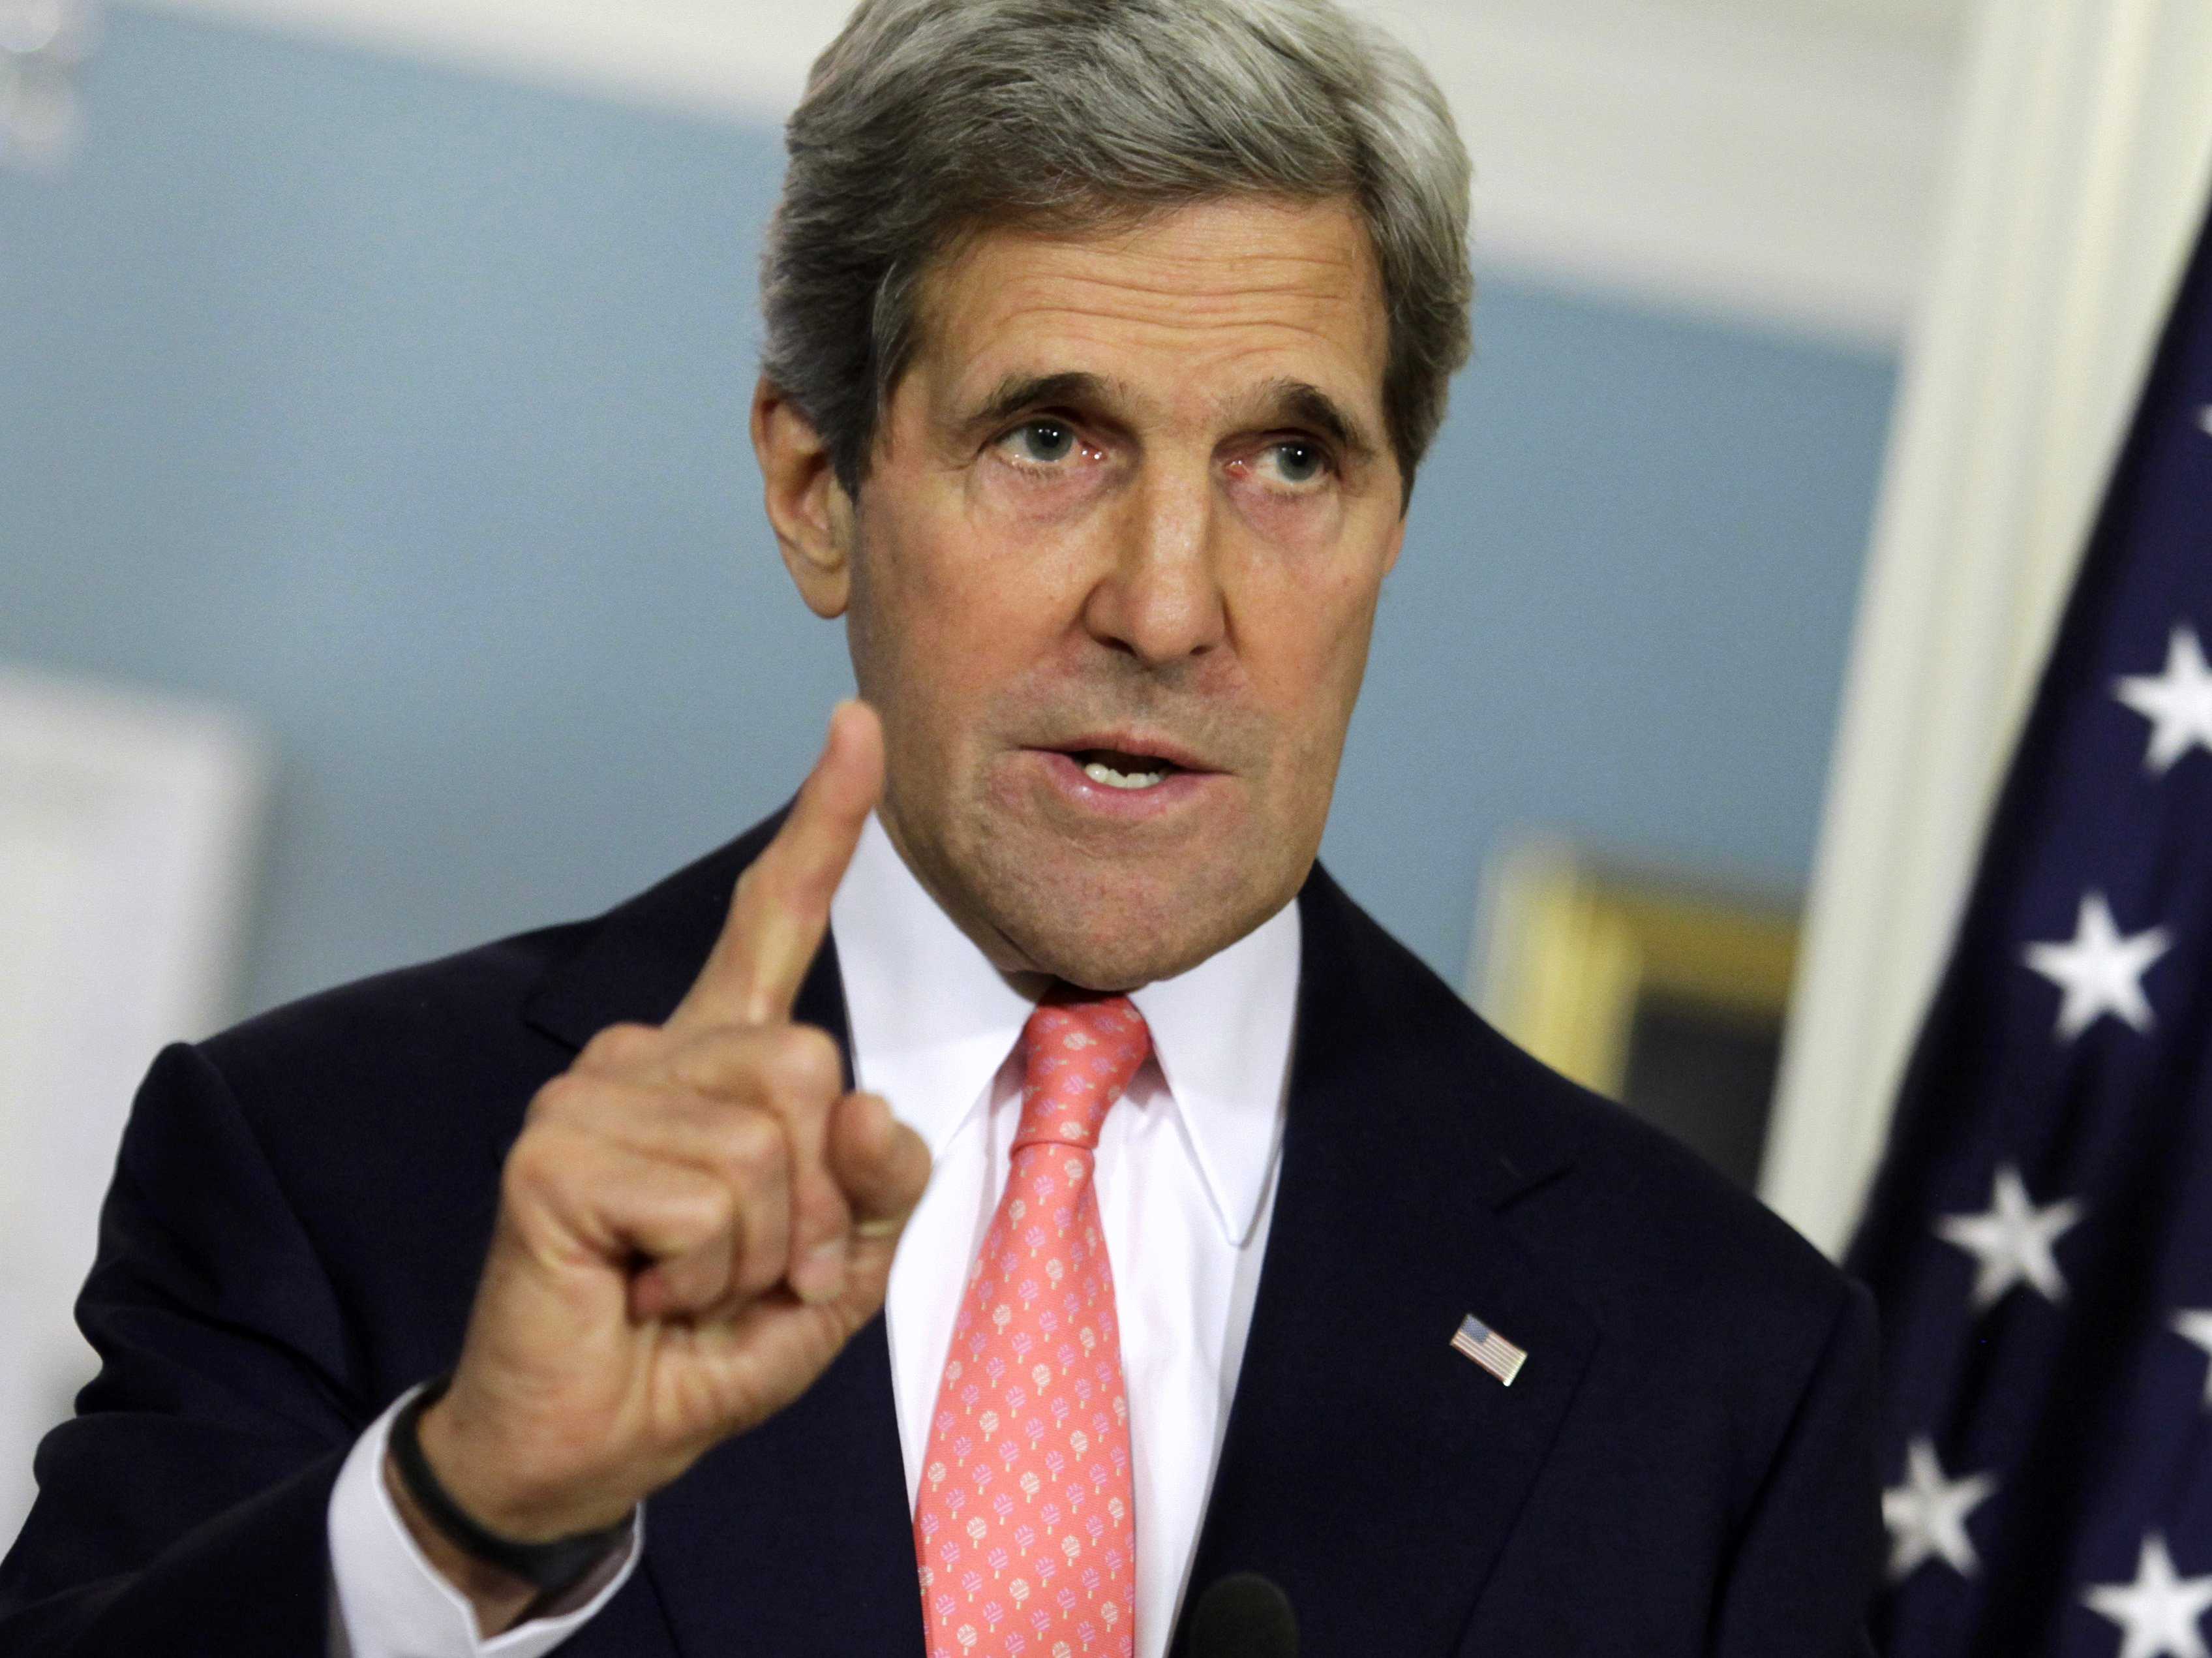 Syria peace efforts must continue despite break with Russia: Kerry